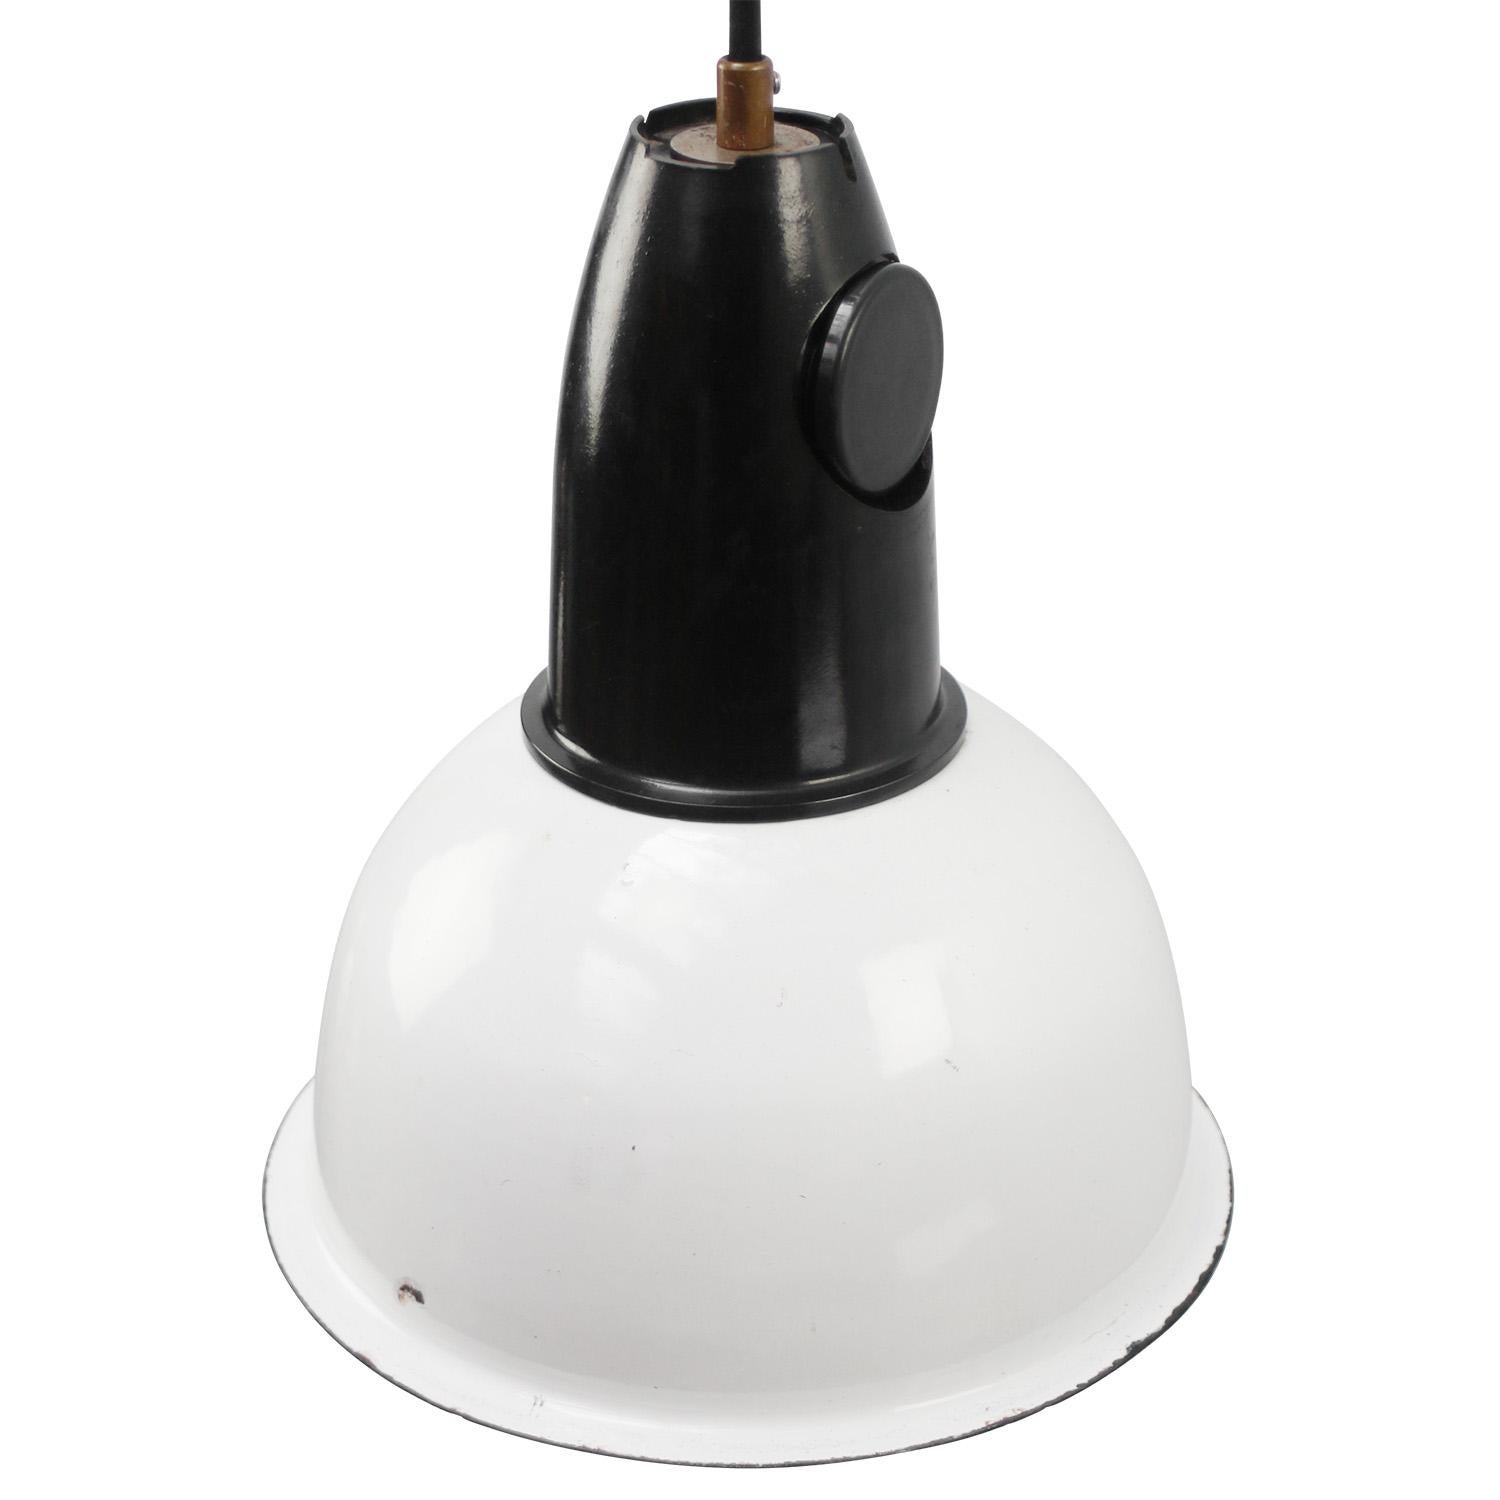 Rare industrial lamp made of white enamel with Bakelite top. 

Weight: 1.20 kg / 2.6 lb

Priced per individual item. All lamps have been made suitable by international standards for incandescent light bulbs, energy-efficient and LED bulbs. E26/E27